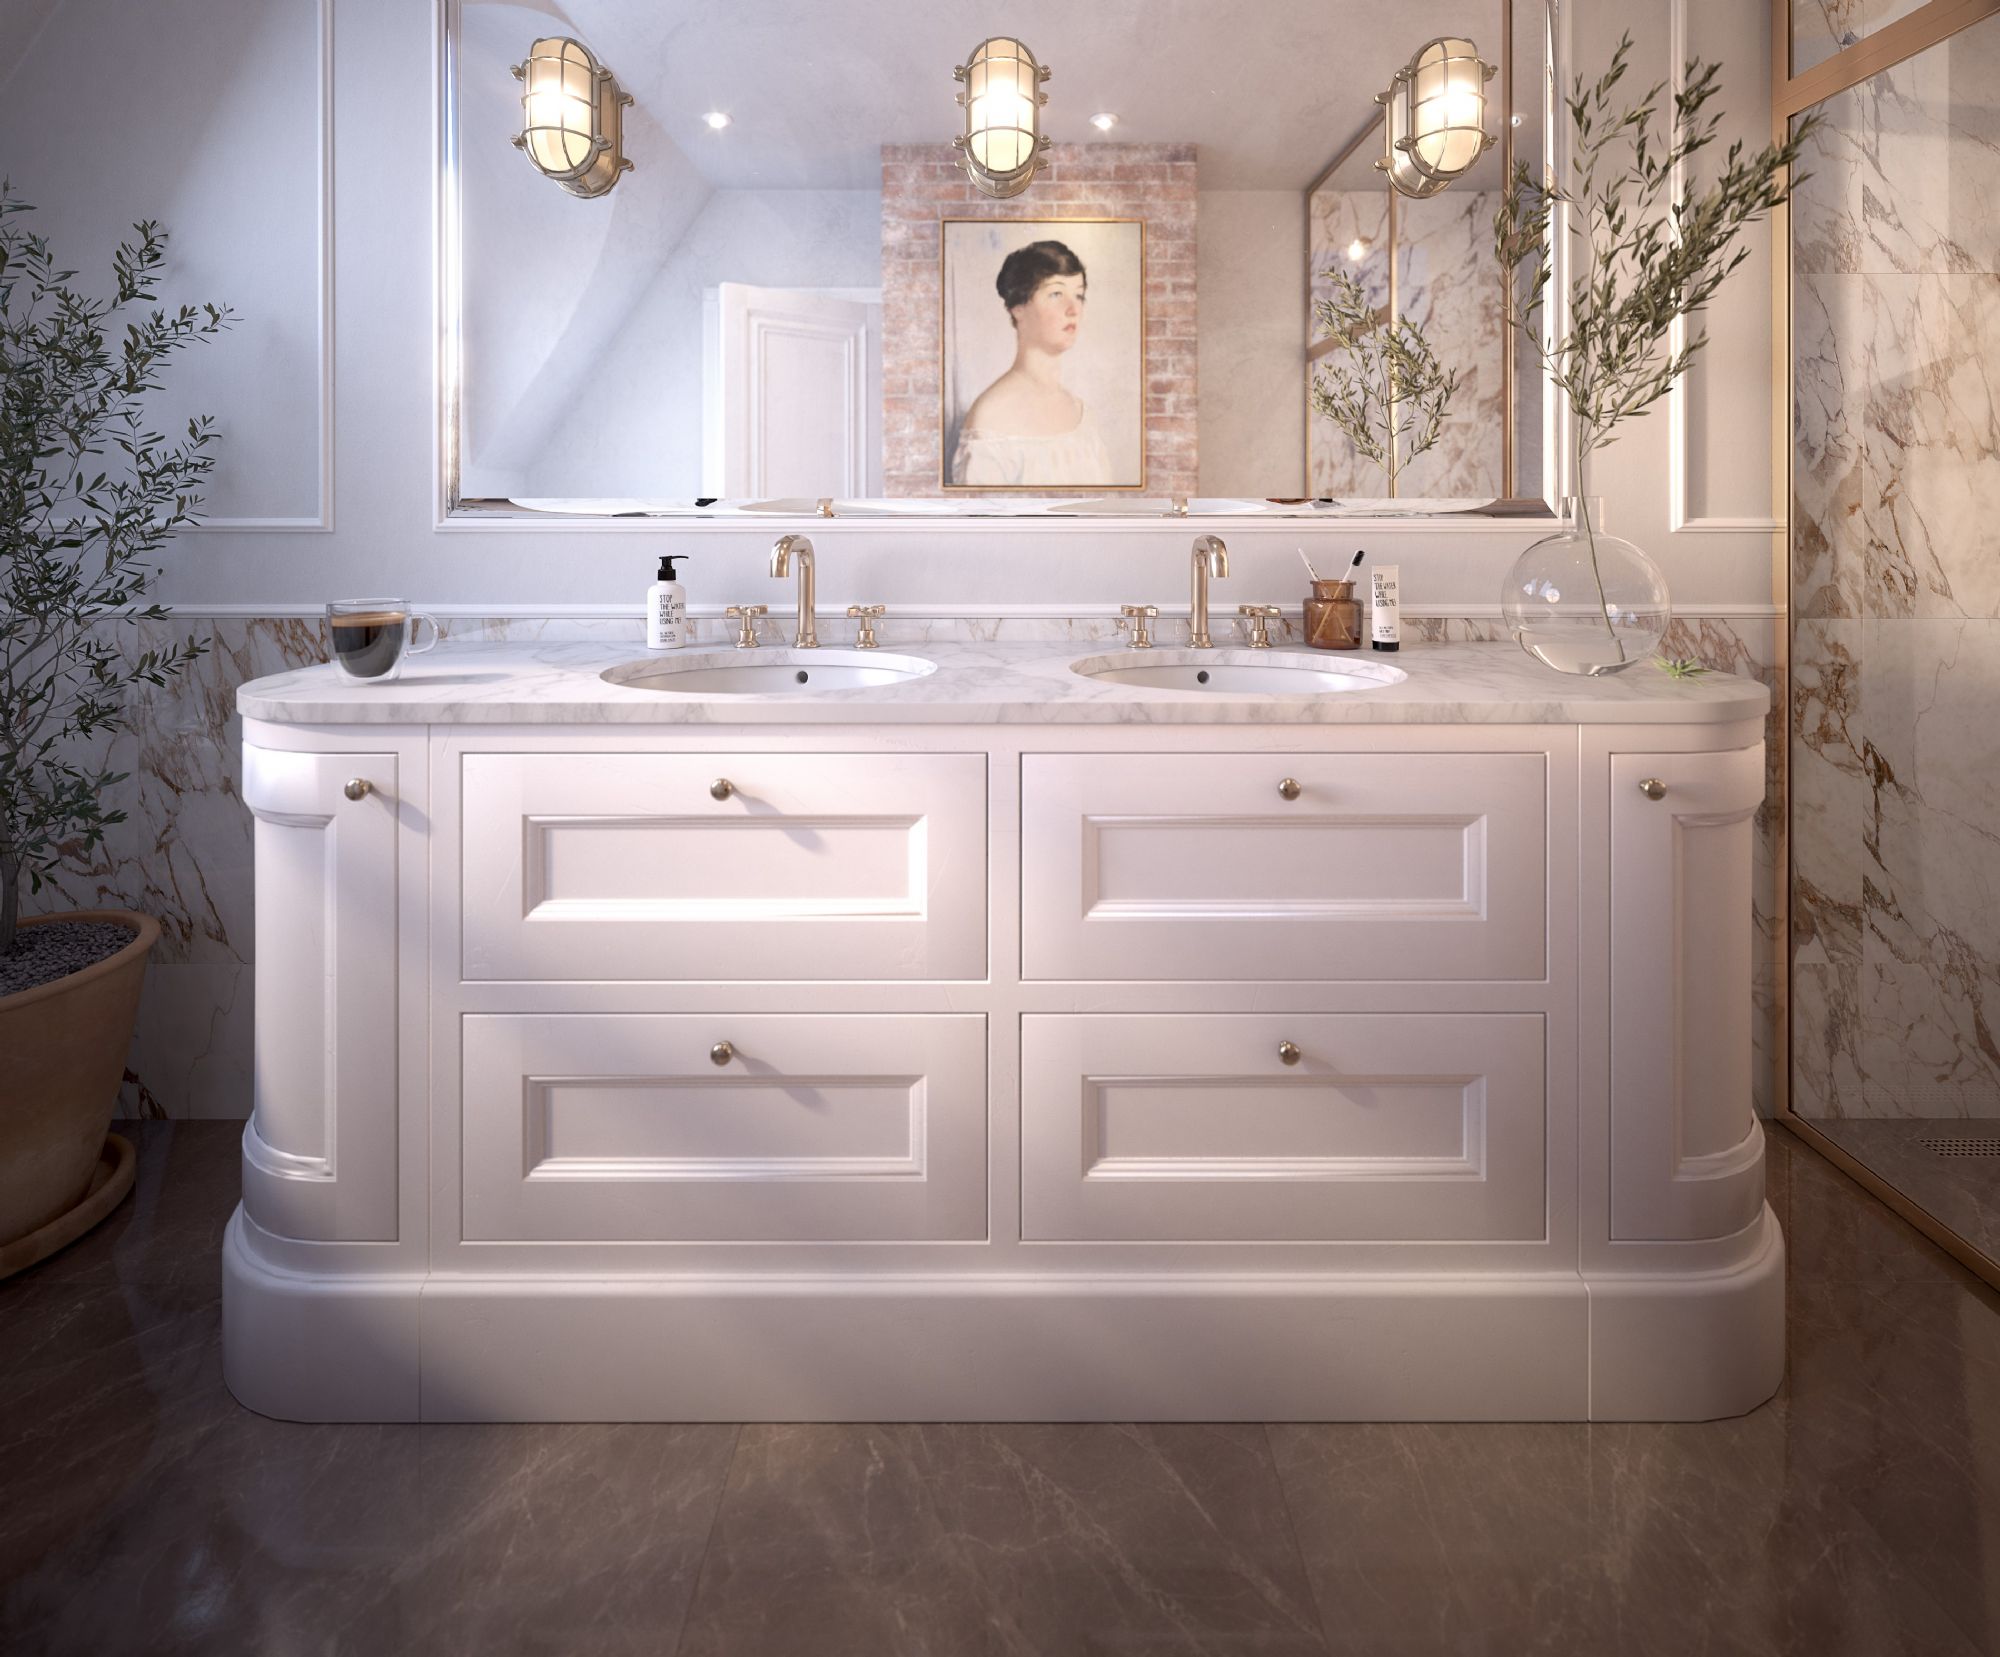 Shop the Rowan furniture range featured above, available in various dimensions to fit bathrooms of all sizes.